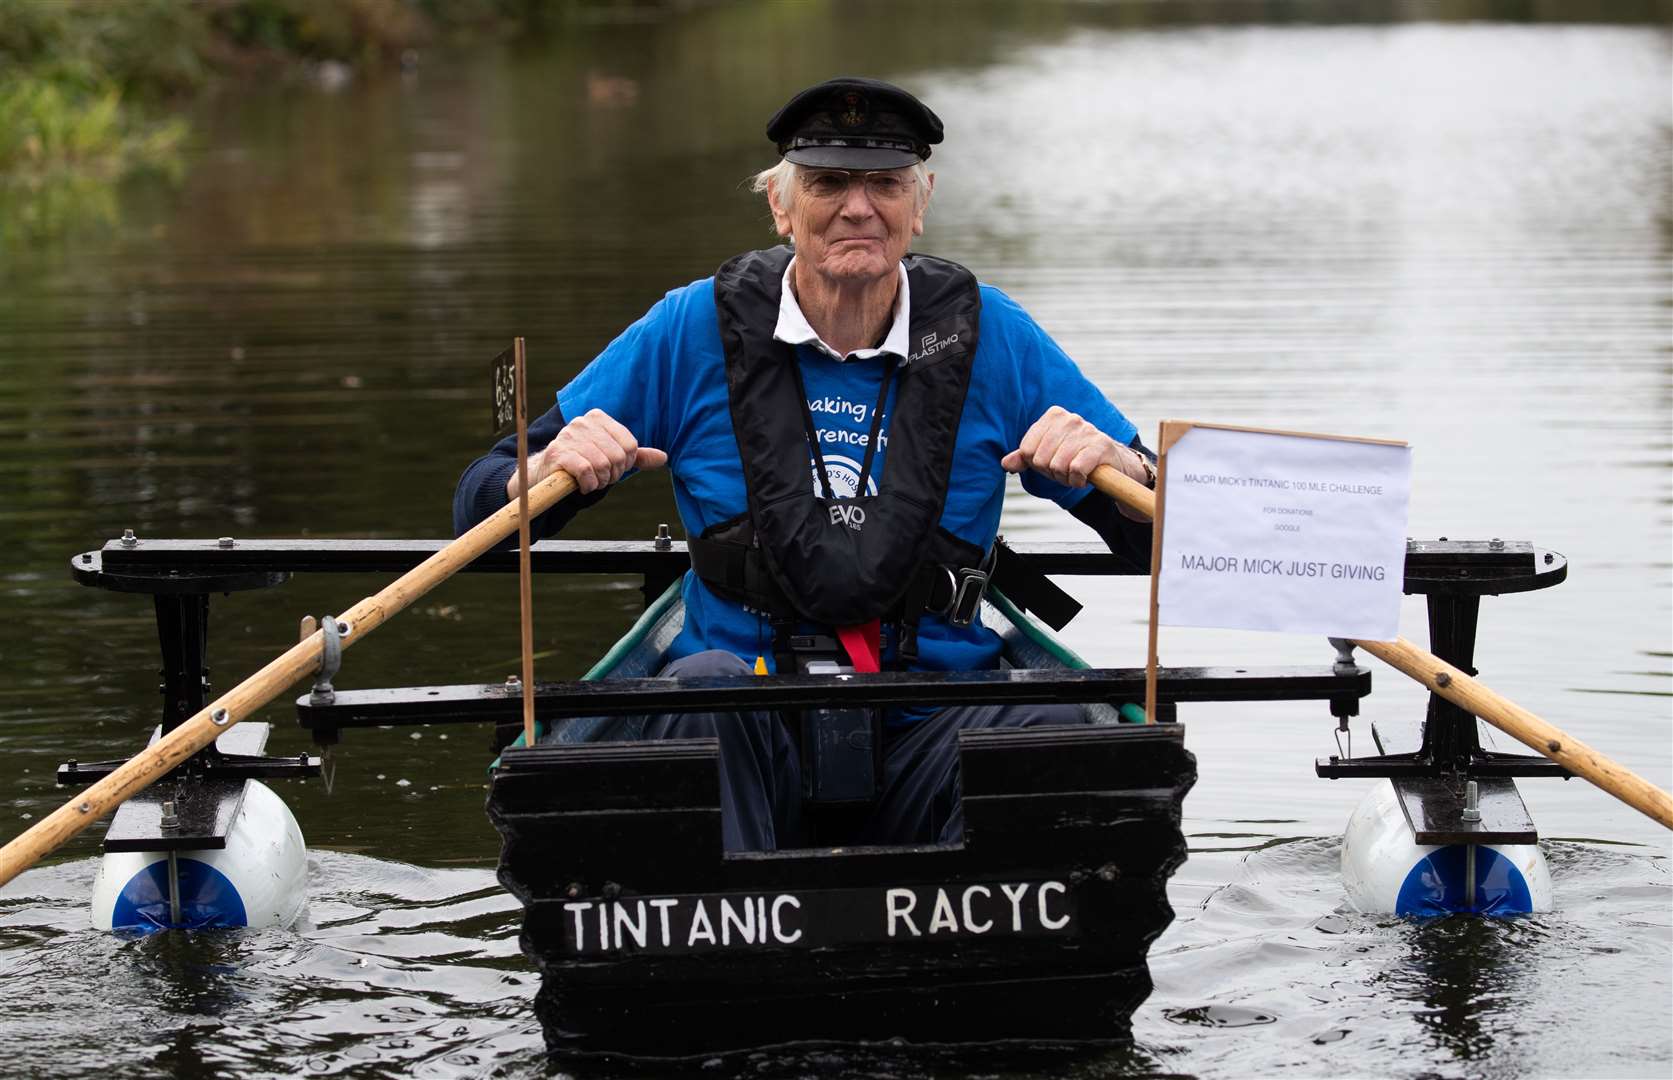 Michael Stanley, also known as ‘Major Mick’, sets off from Hunston, West Sussex, to row along the Chichester canal (Andrew Matthews/PA)